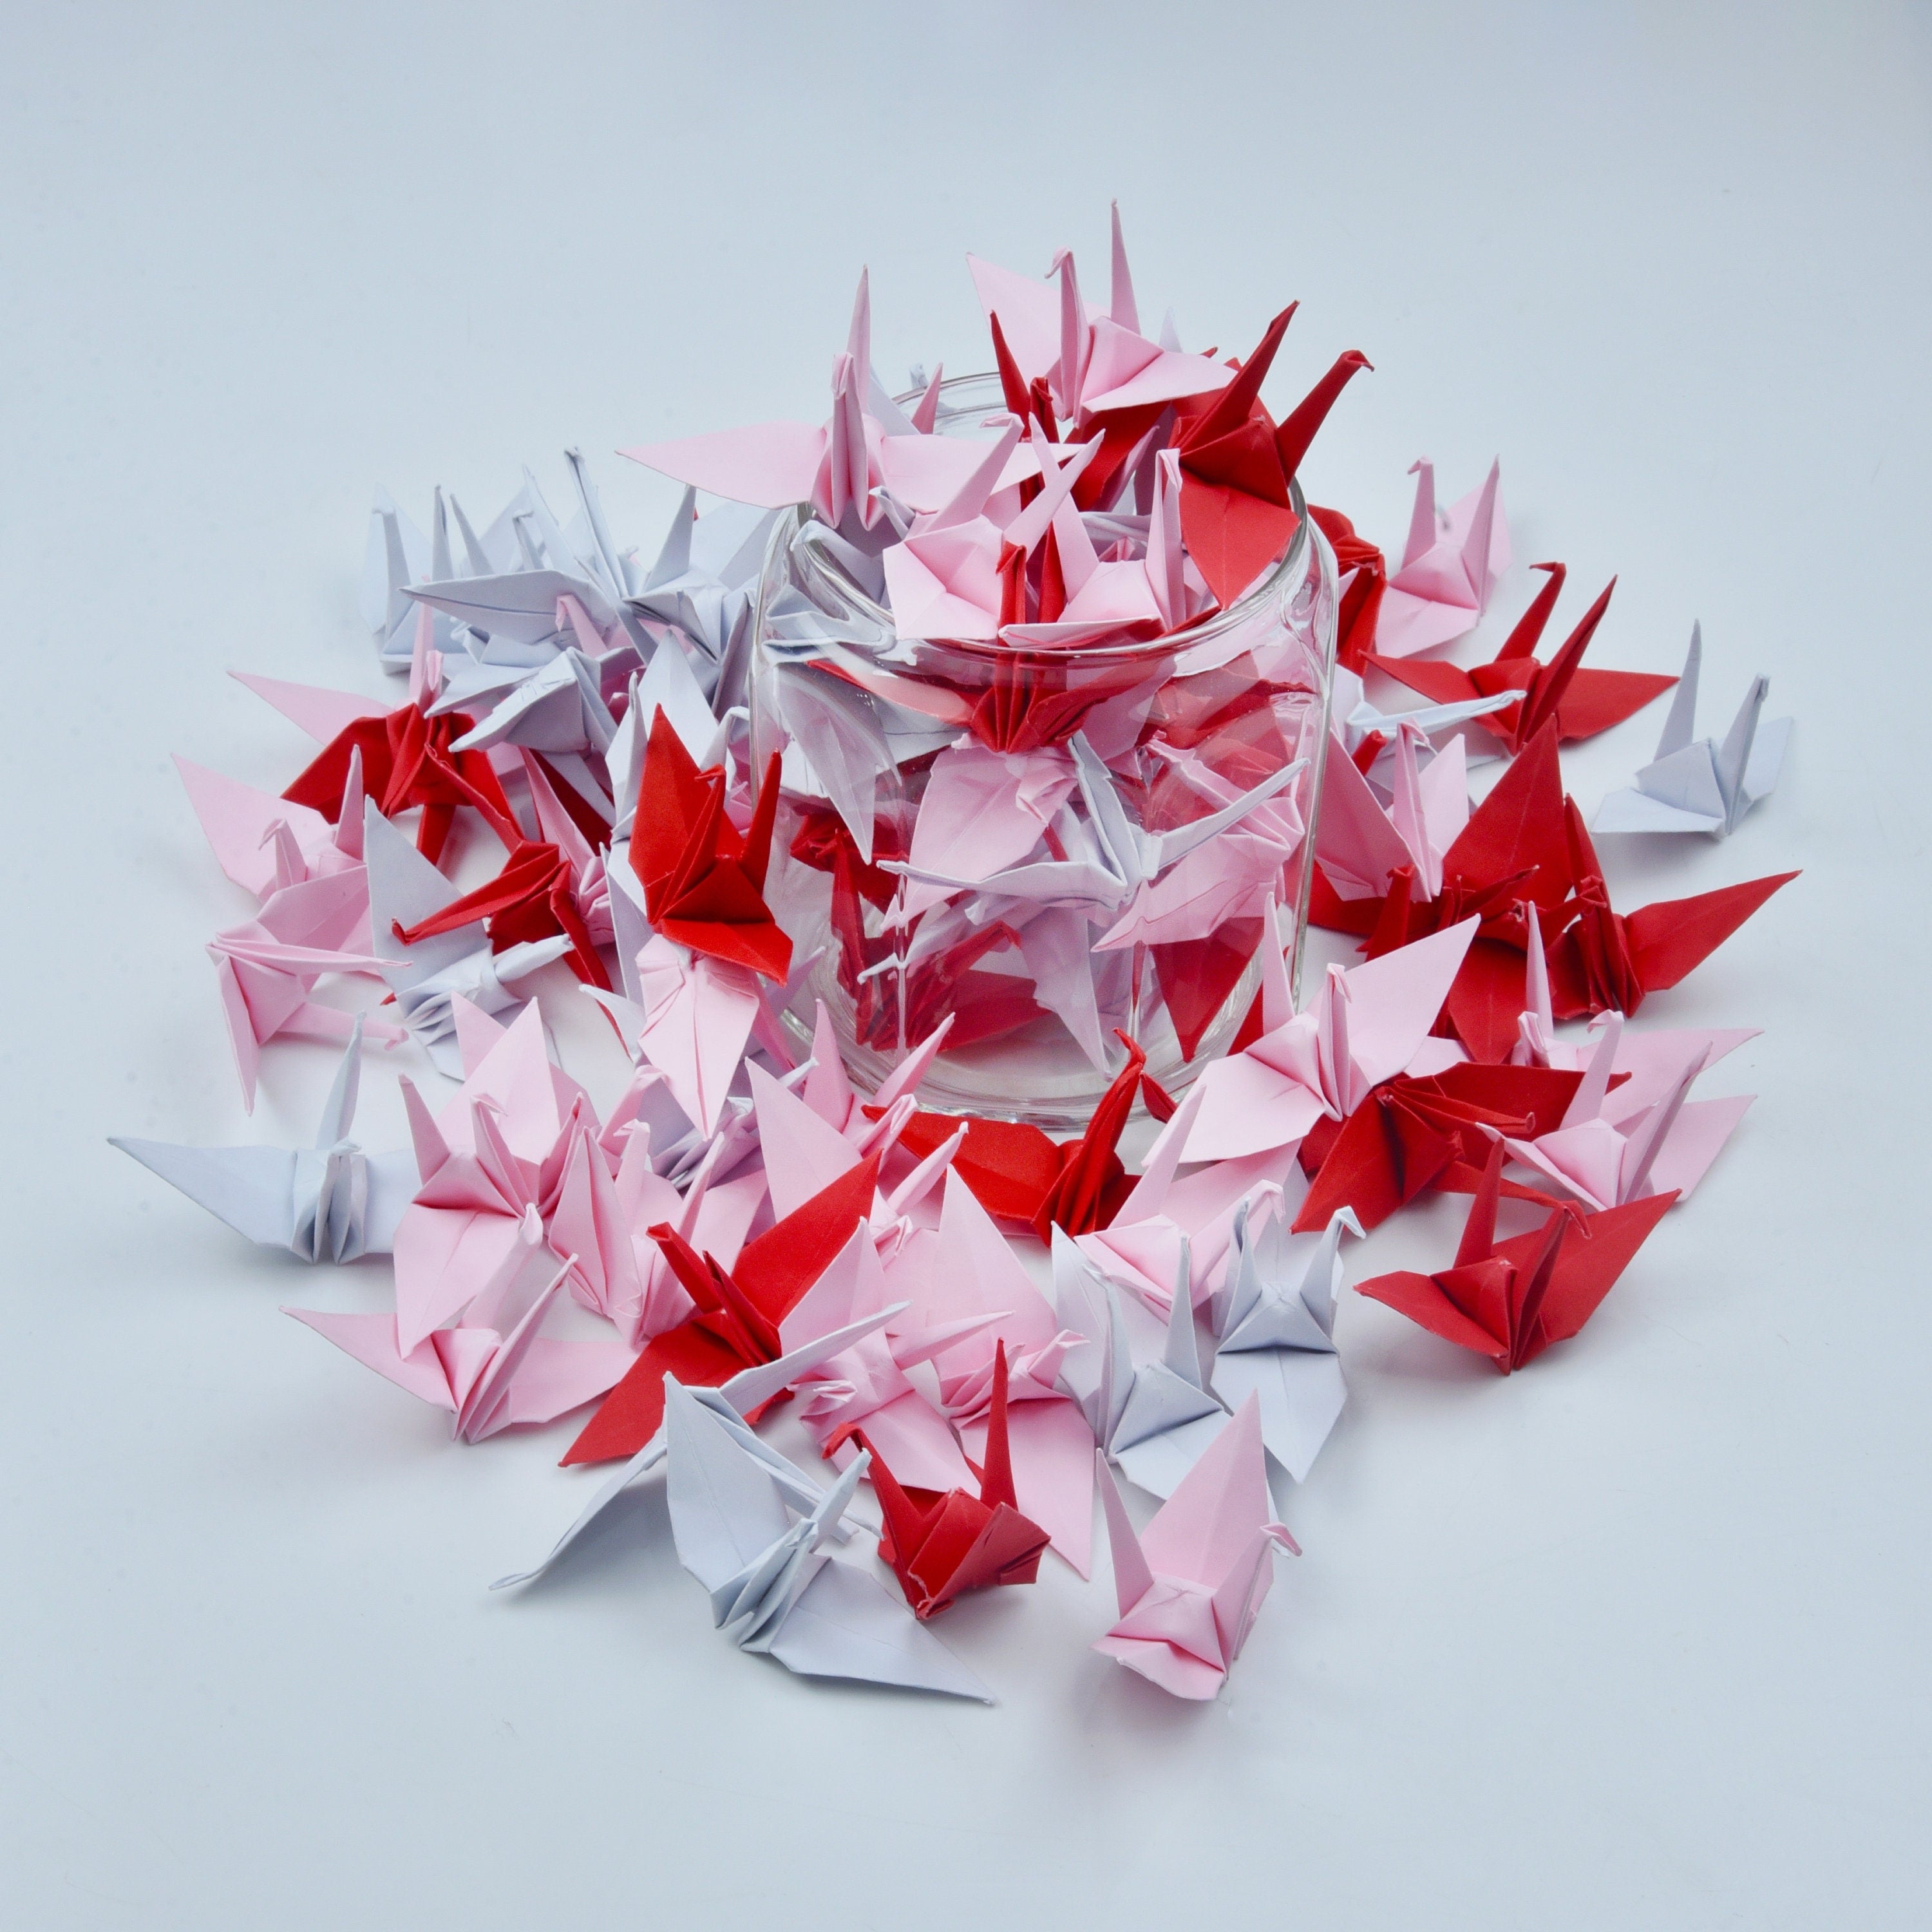 100 Origami Paper Crane Red 3x3 inches Handmade Folding for Wedding Decoration, Japanese Wedding, Valentines